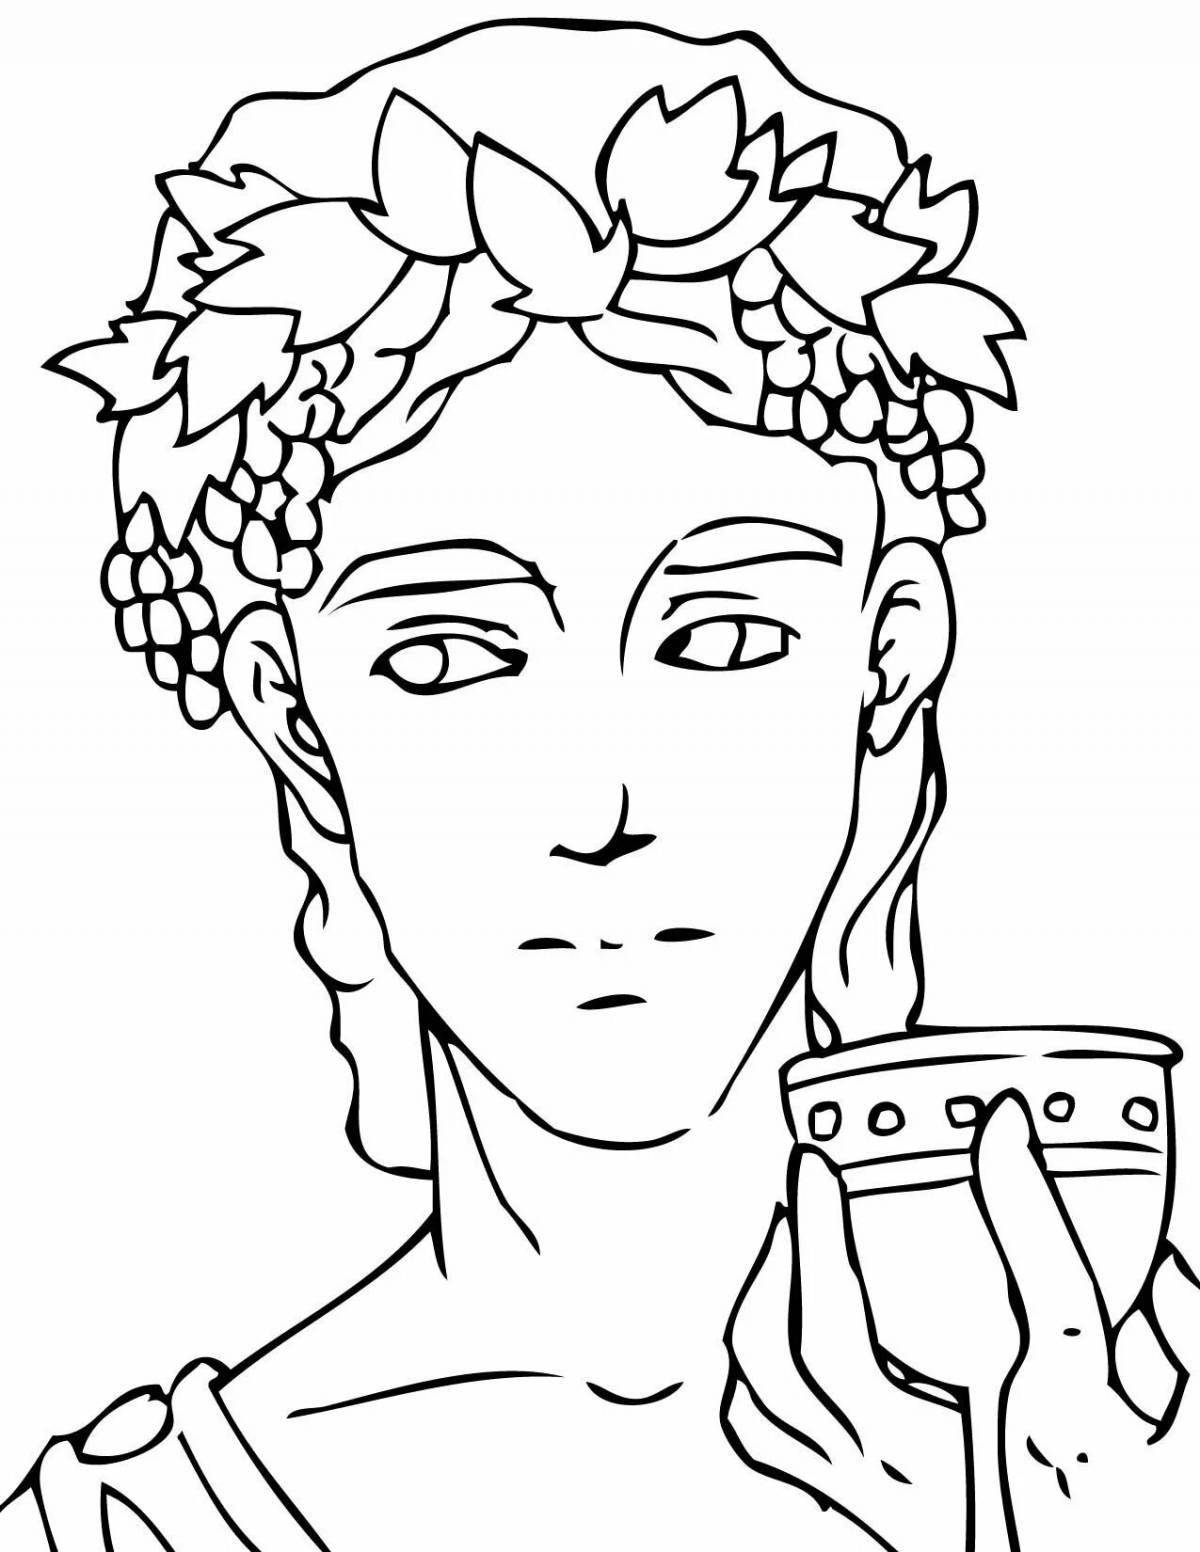 Exquisite ancient greece coloring book